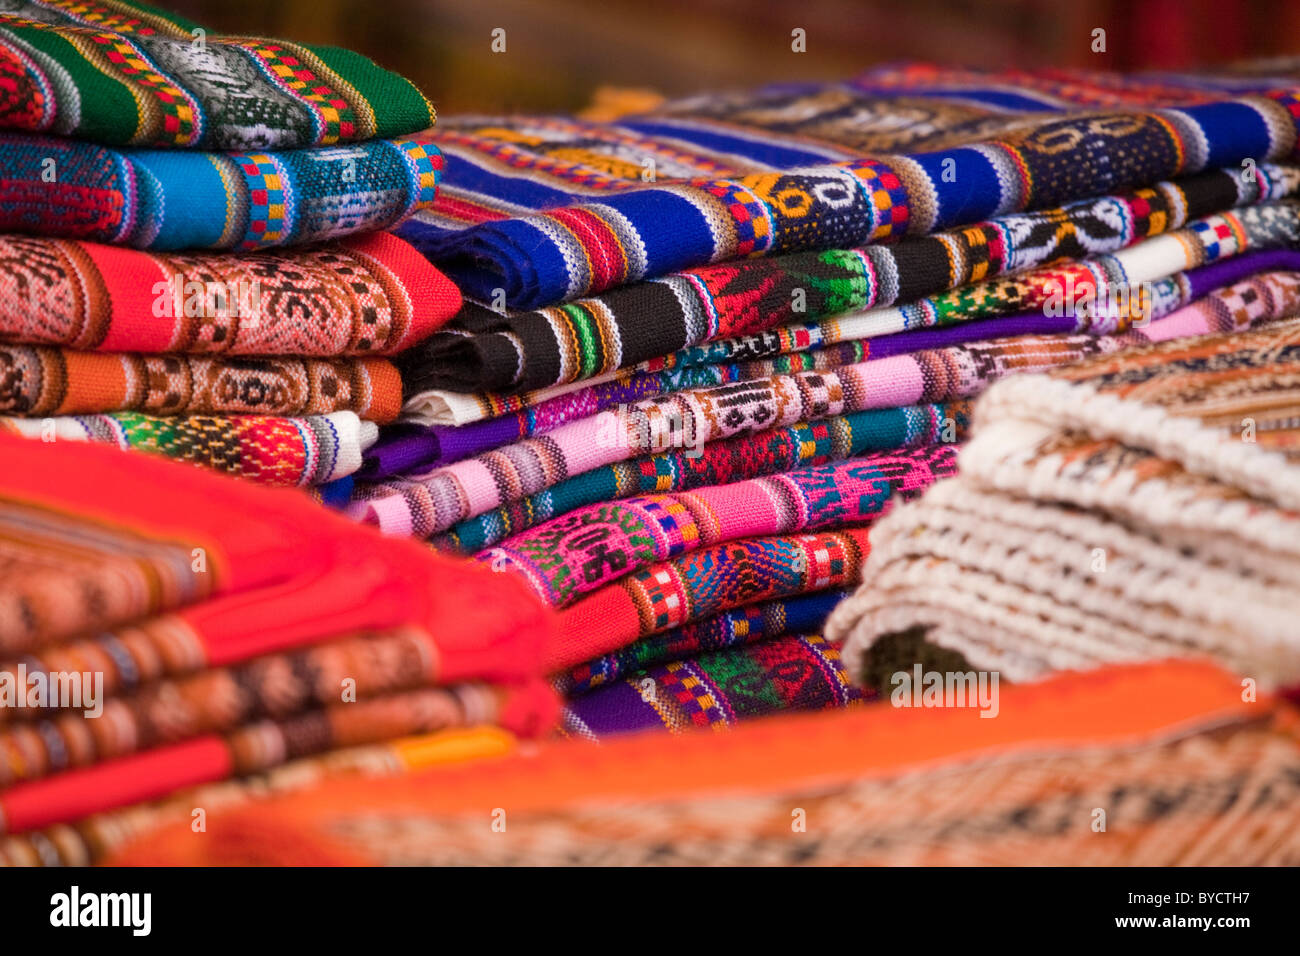 material and cloth typical of South America on sale at local markets, Peru. Stock Photo